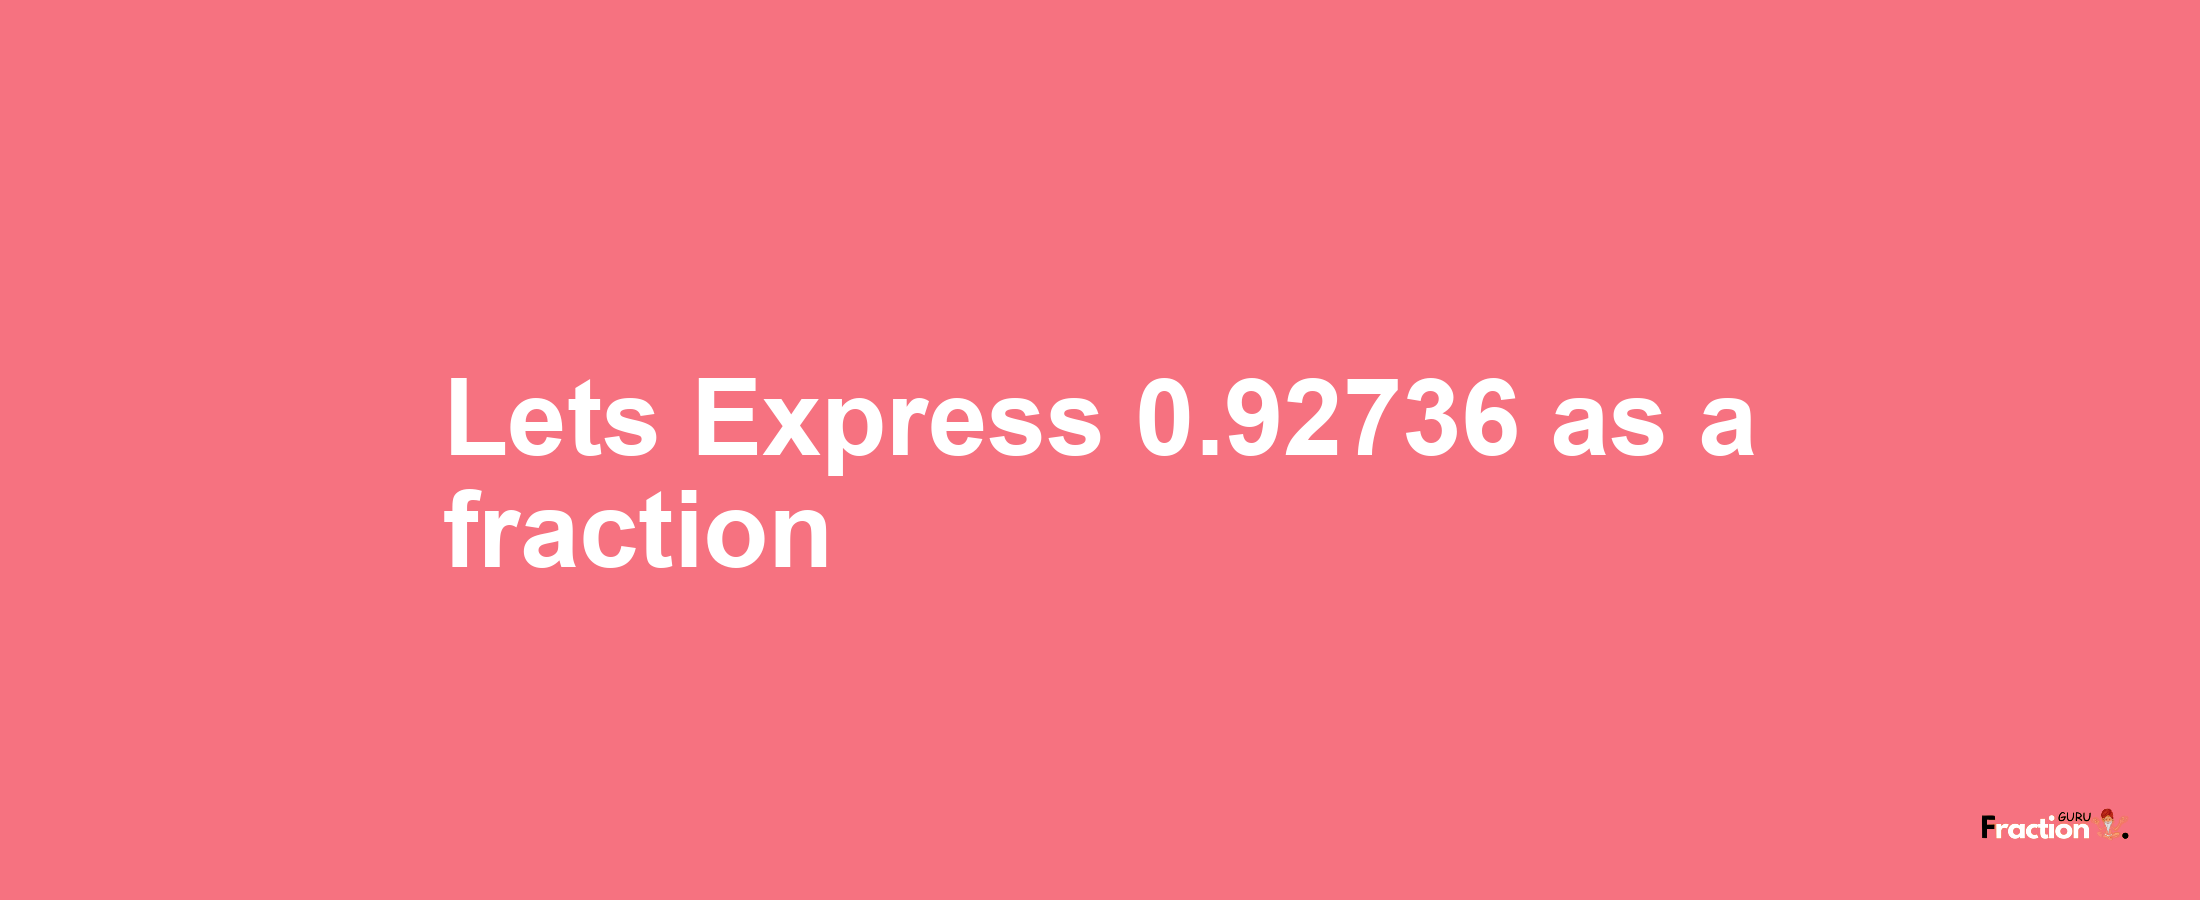 Lets Express 0.92736 as afraction